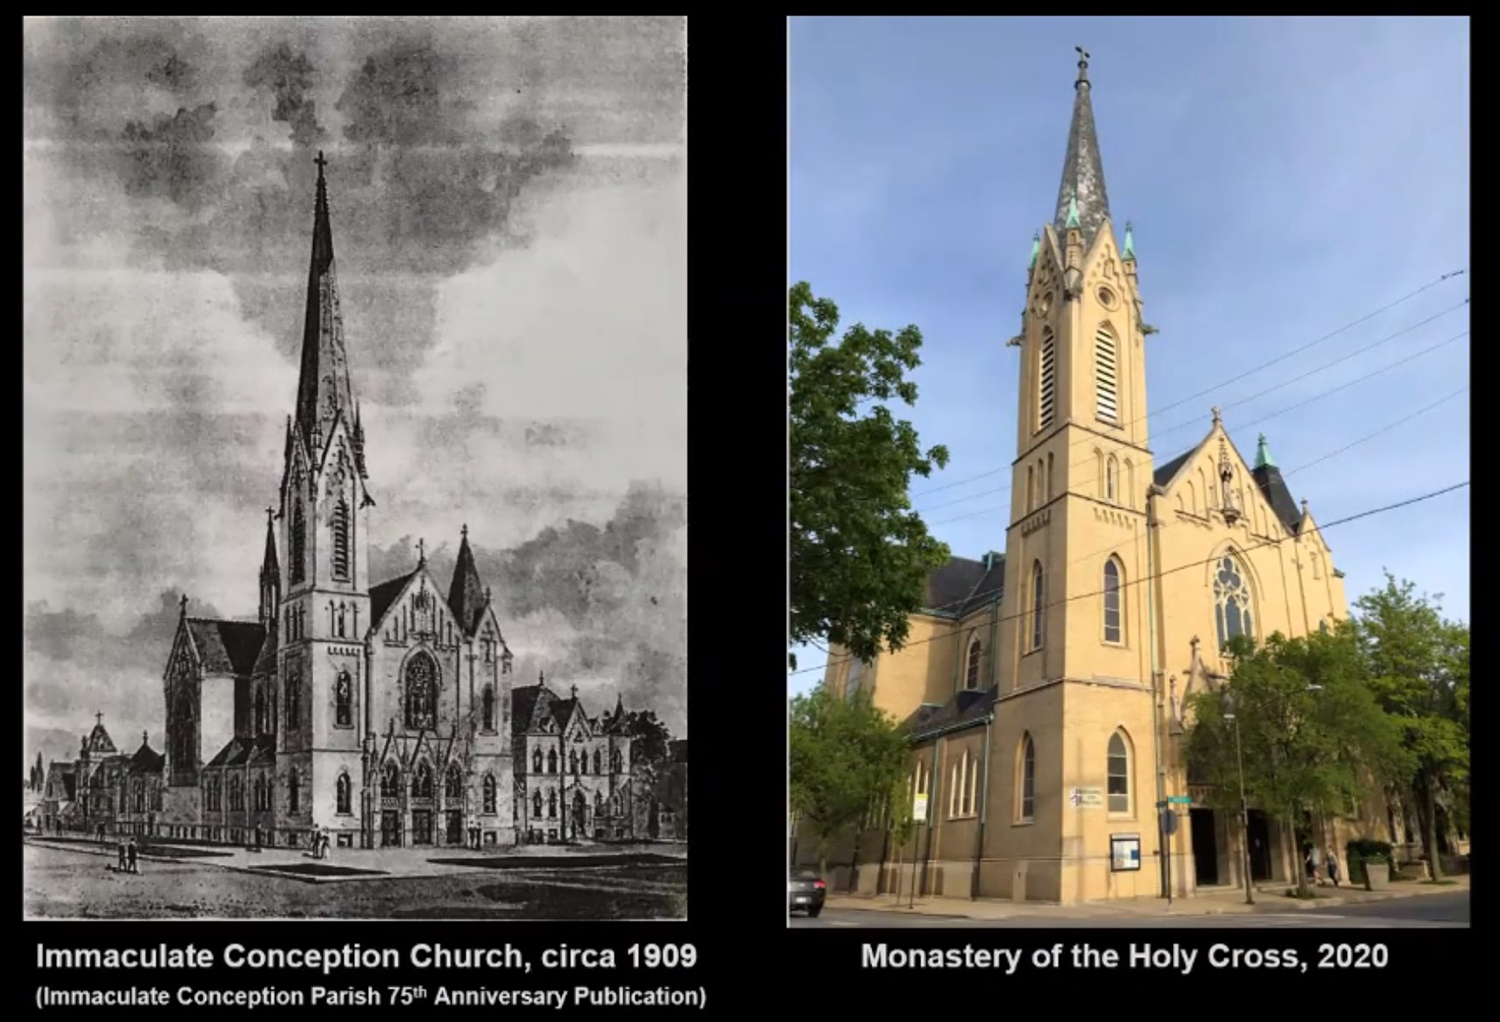 Monastery of the Holy Cross Historical Image vs. Current Conditions. Image by CCL